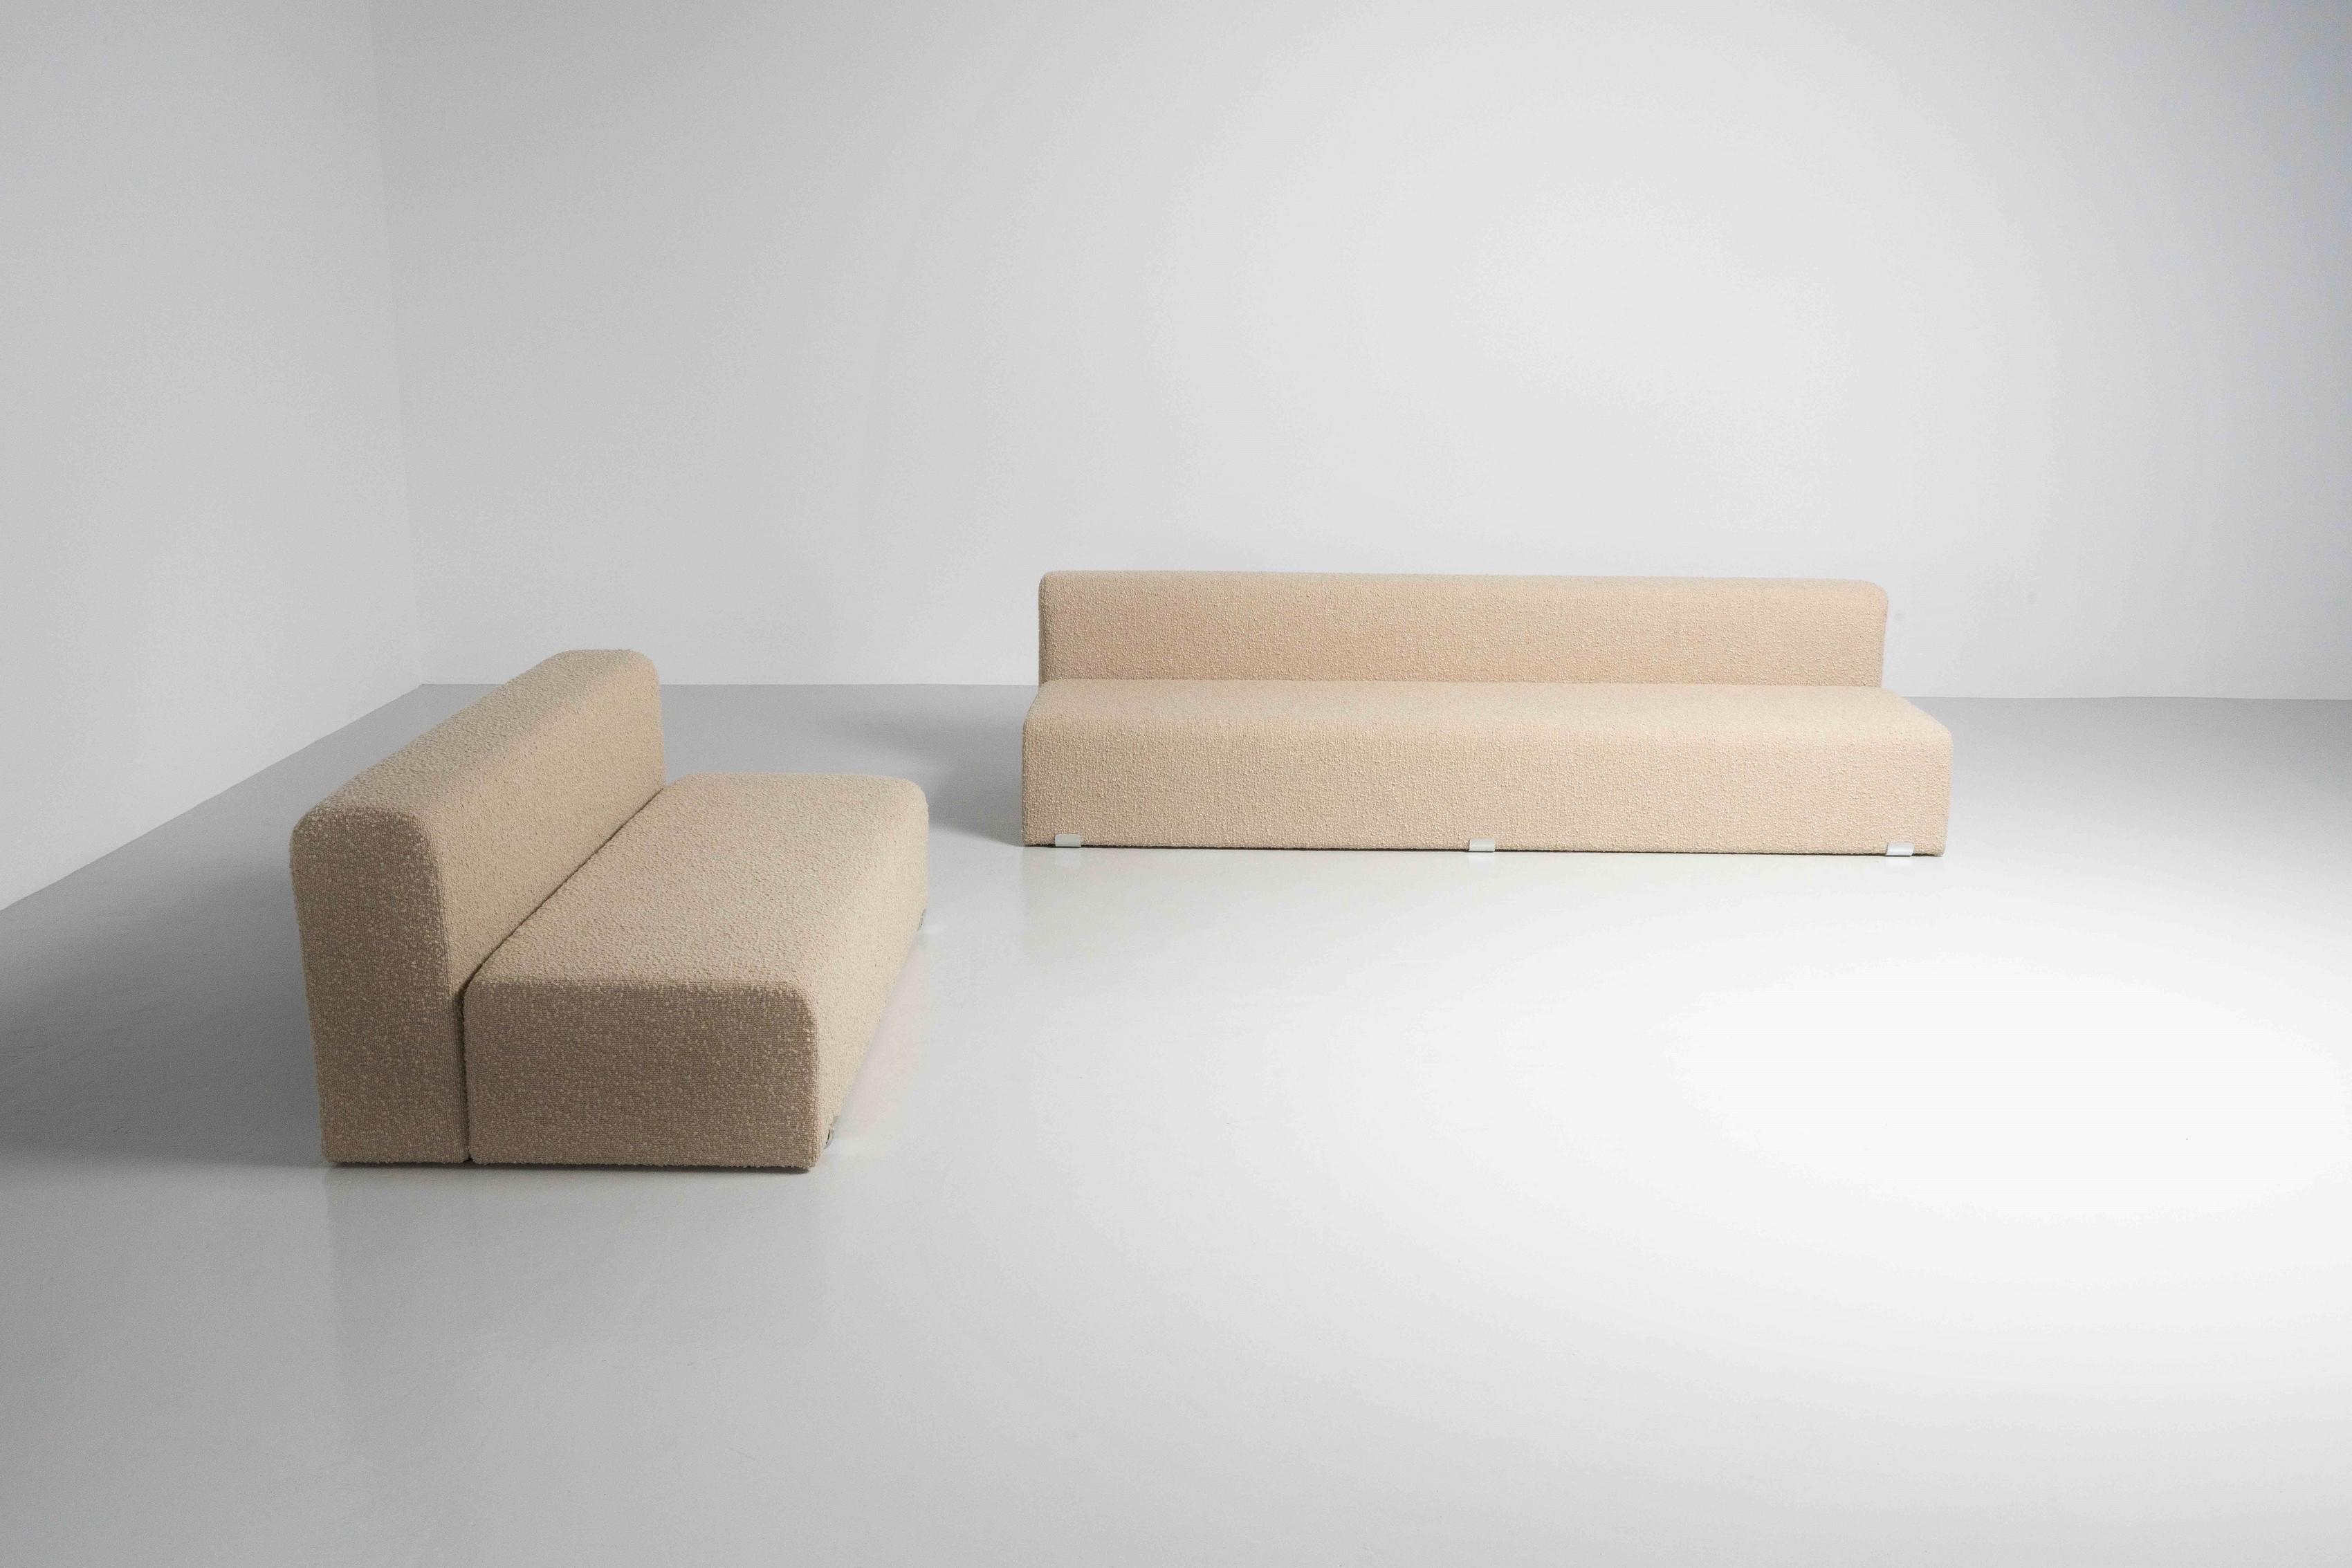 Very nice and minimalistic set of 'Marcel' sofas designed by Kazuhide Takahama and produced in Italy by Gavina in 1965. This beautiful set is in very good condition and has been reupholstered by us in high quality sand colored Italian Bouclé.